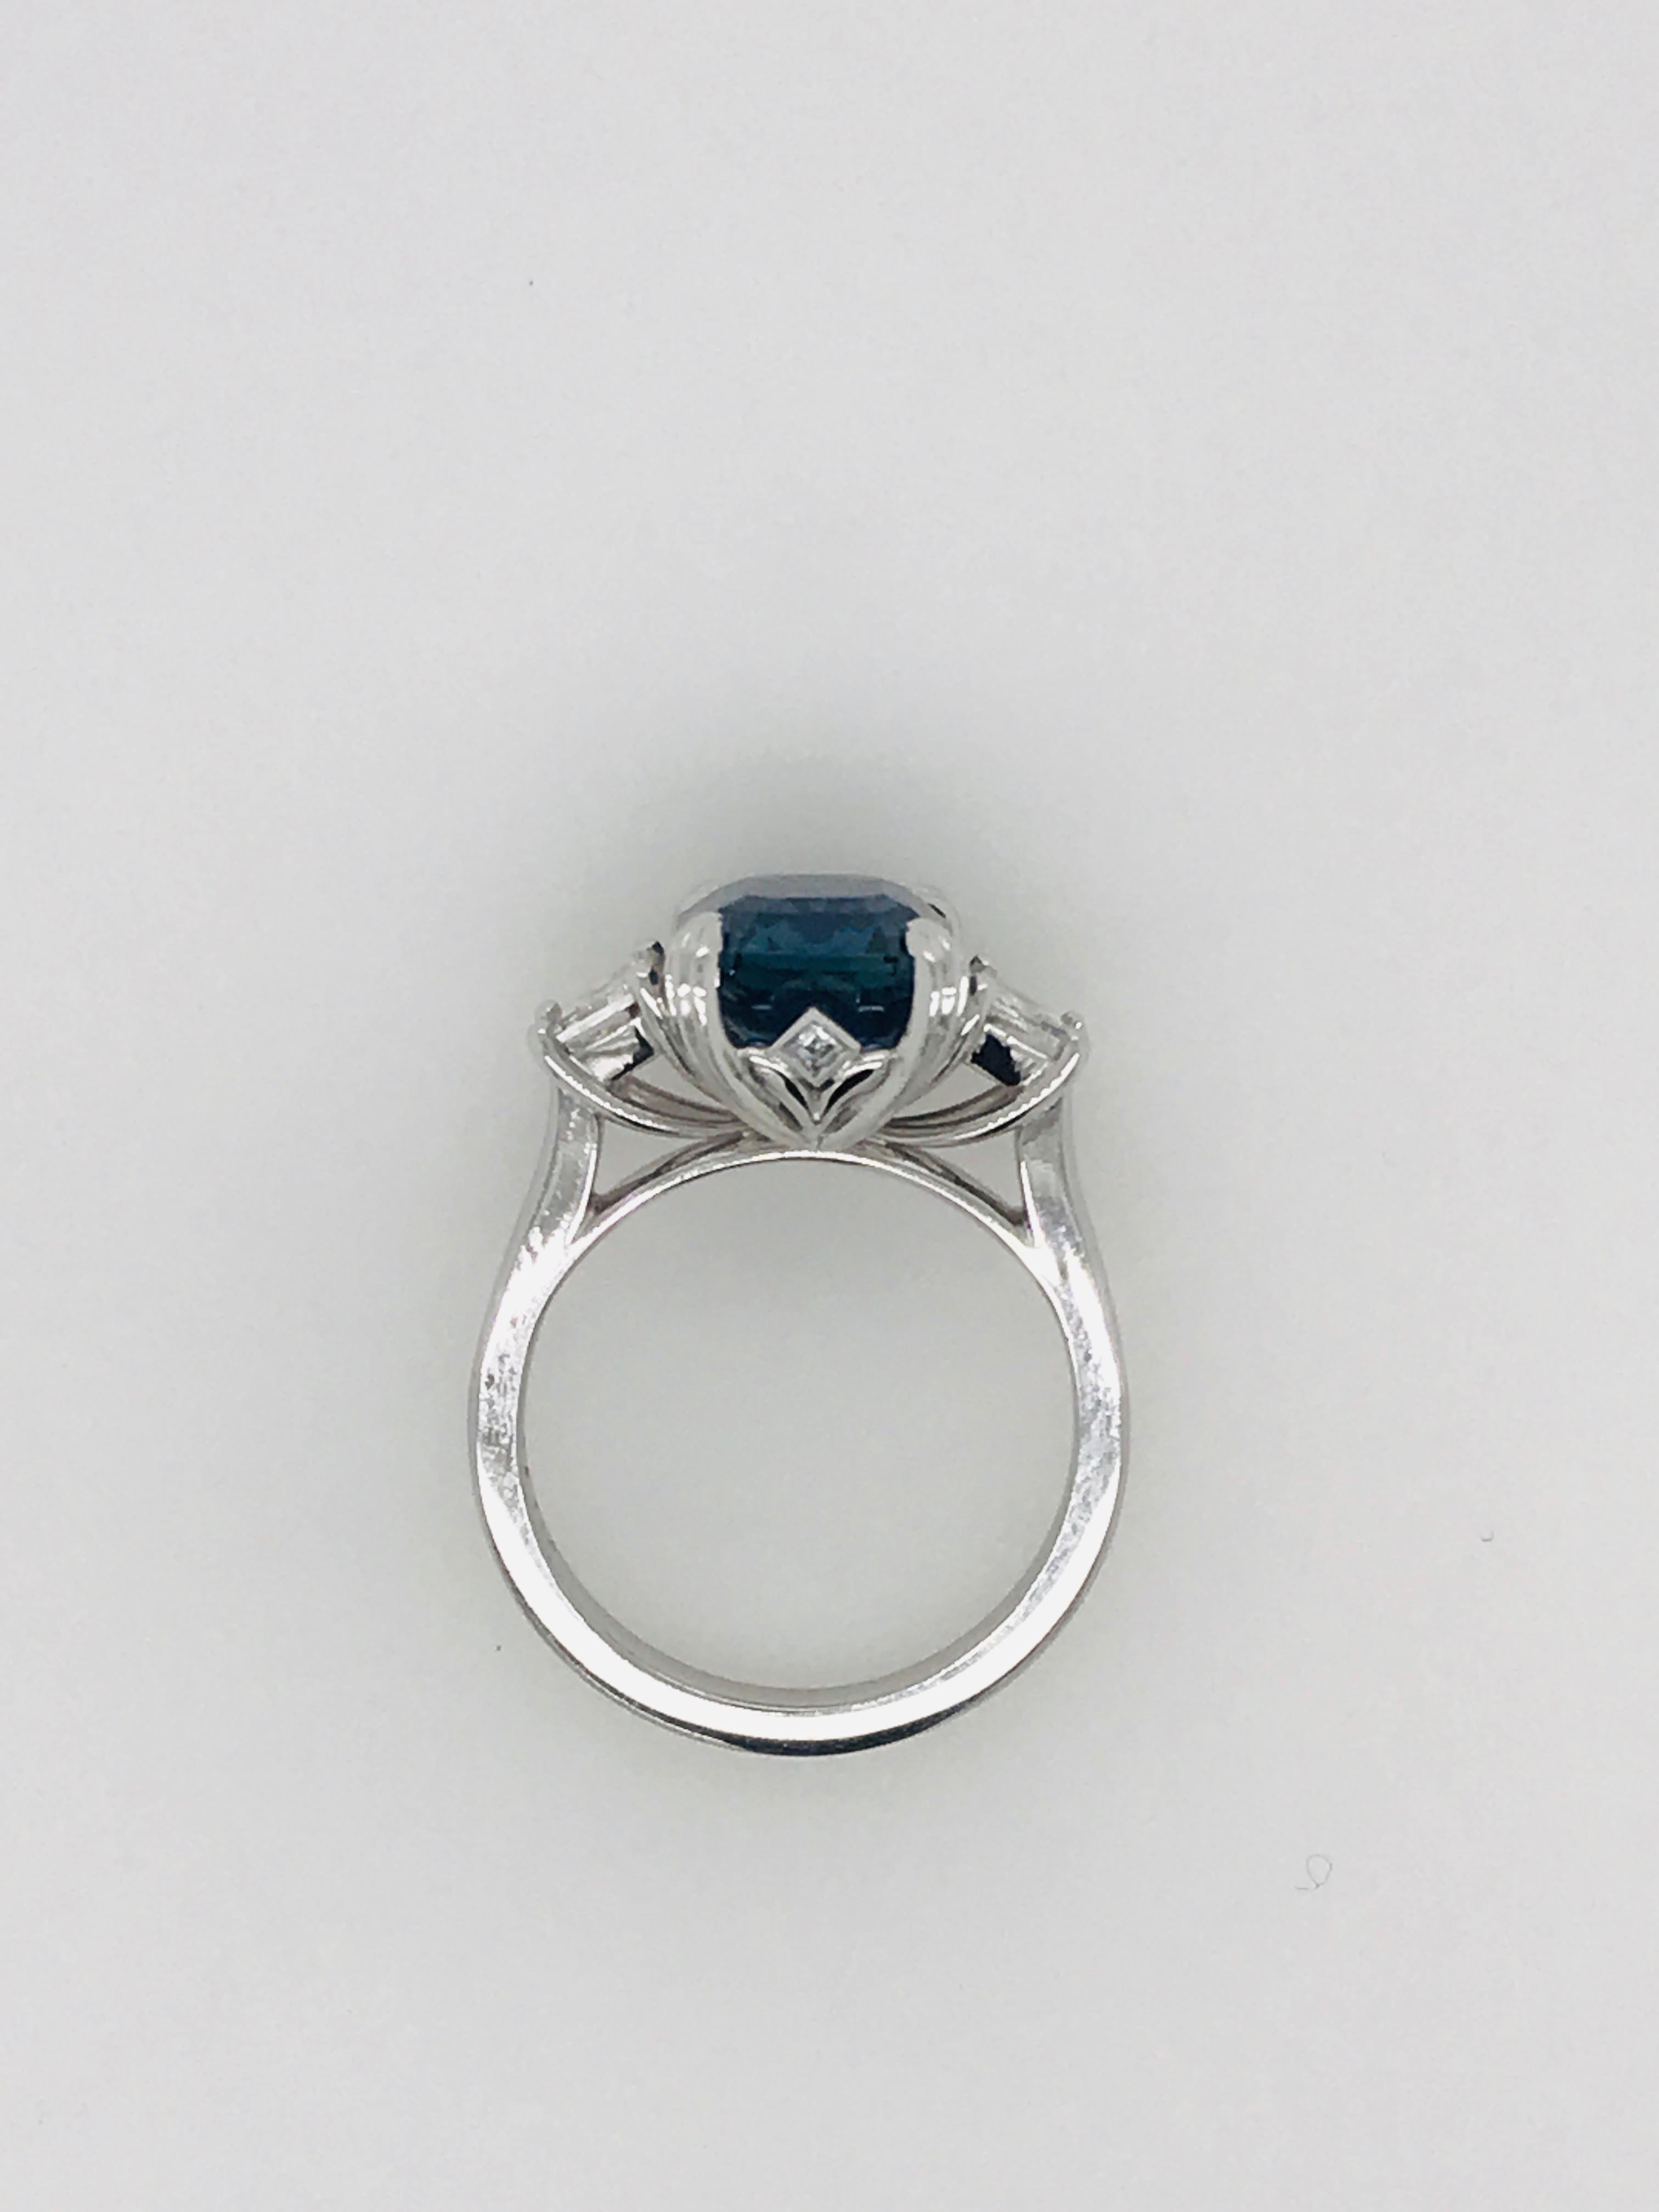 Emerald Cut 5.12 Carat Madagascan Sapphire and Trapezoid Diamond Ring in 18 Carat White Gold